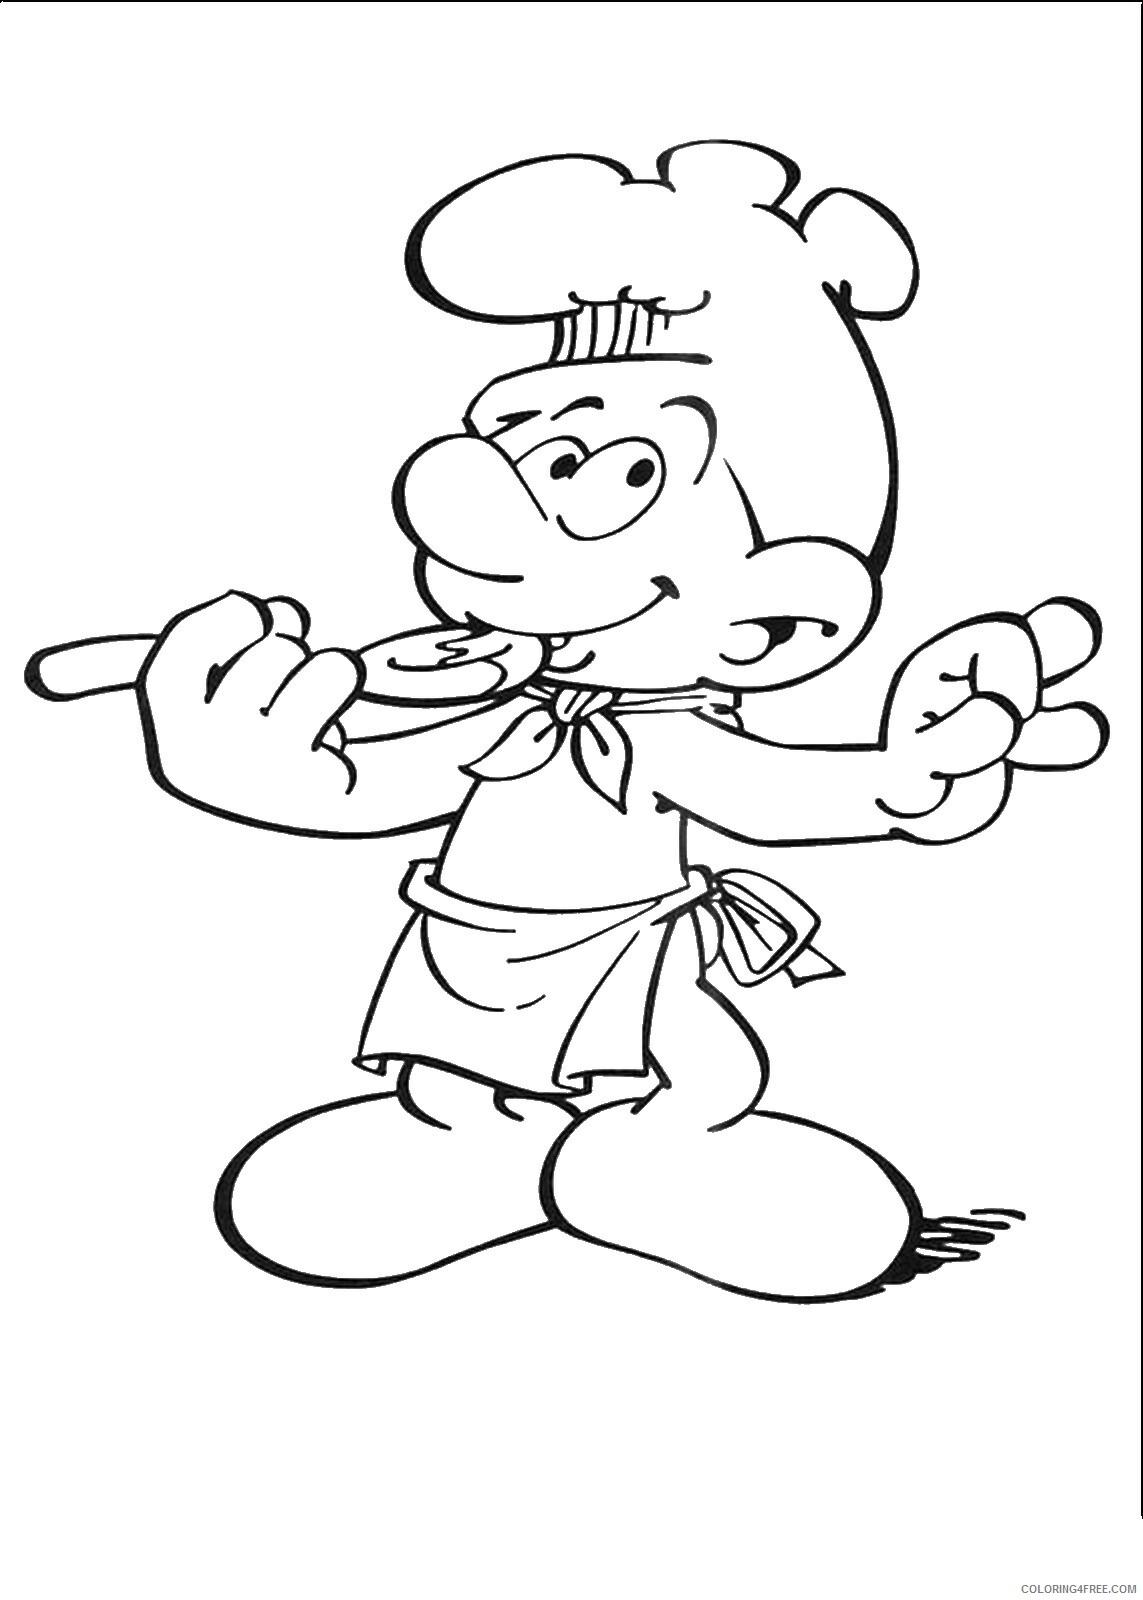 The Smurfs Coloring Pages TV Film smurfs_17 Printable 2020 09718 Coloring4free